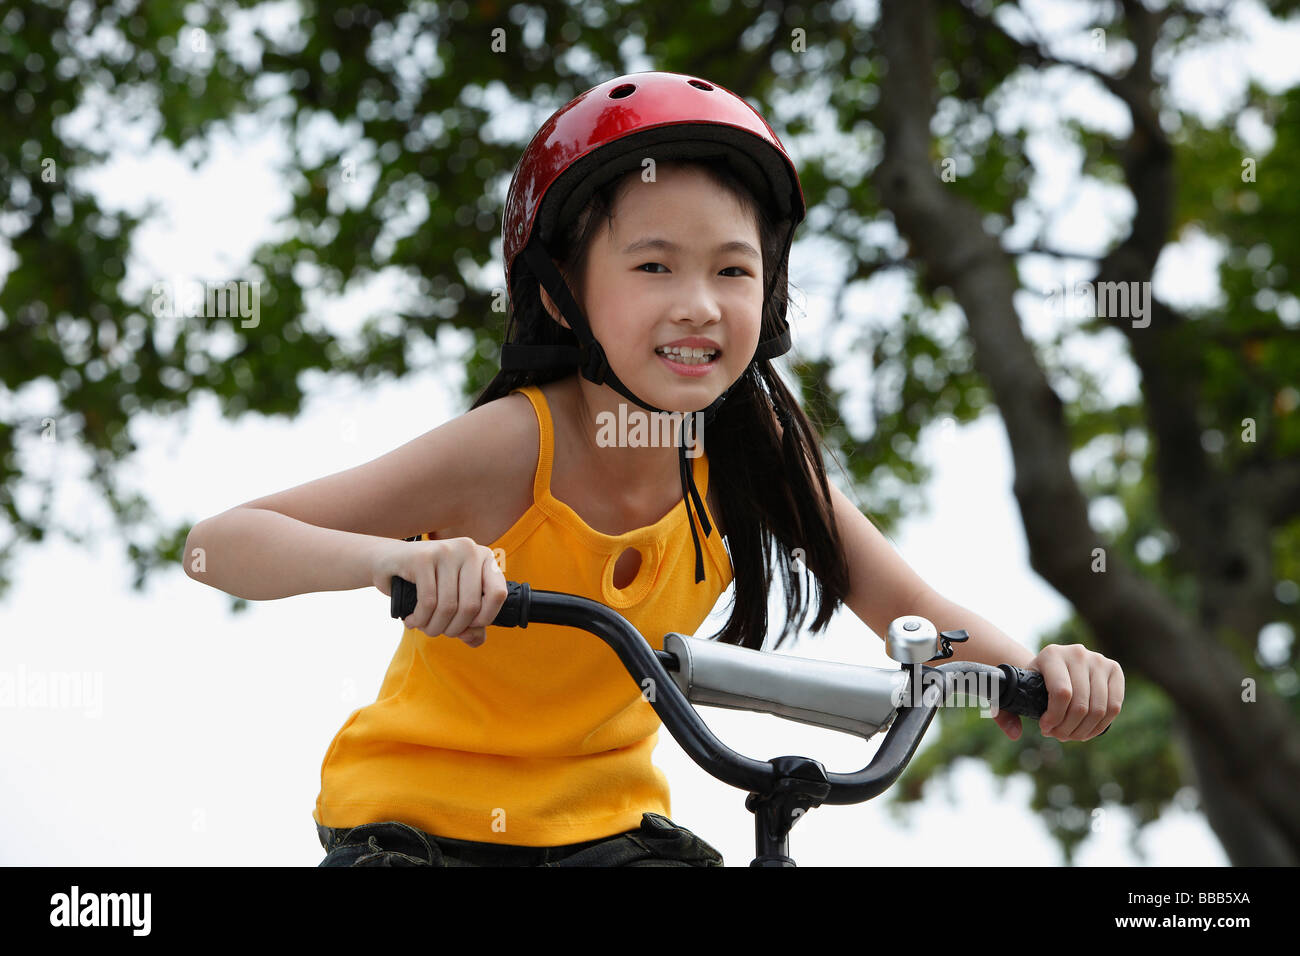 Young Girl riding bike Banque D'Images